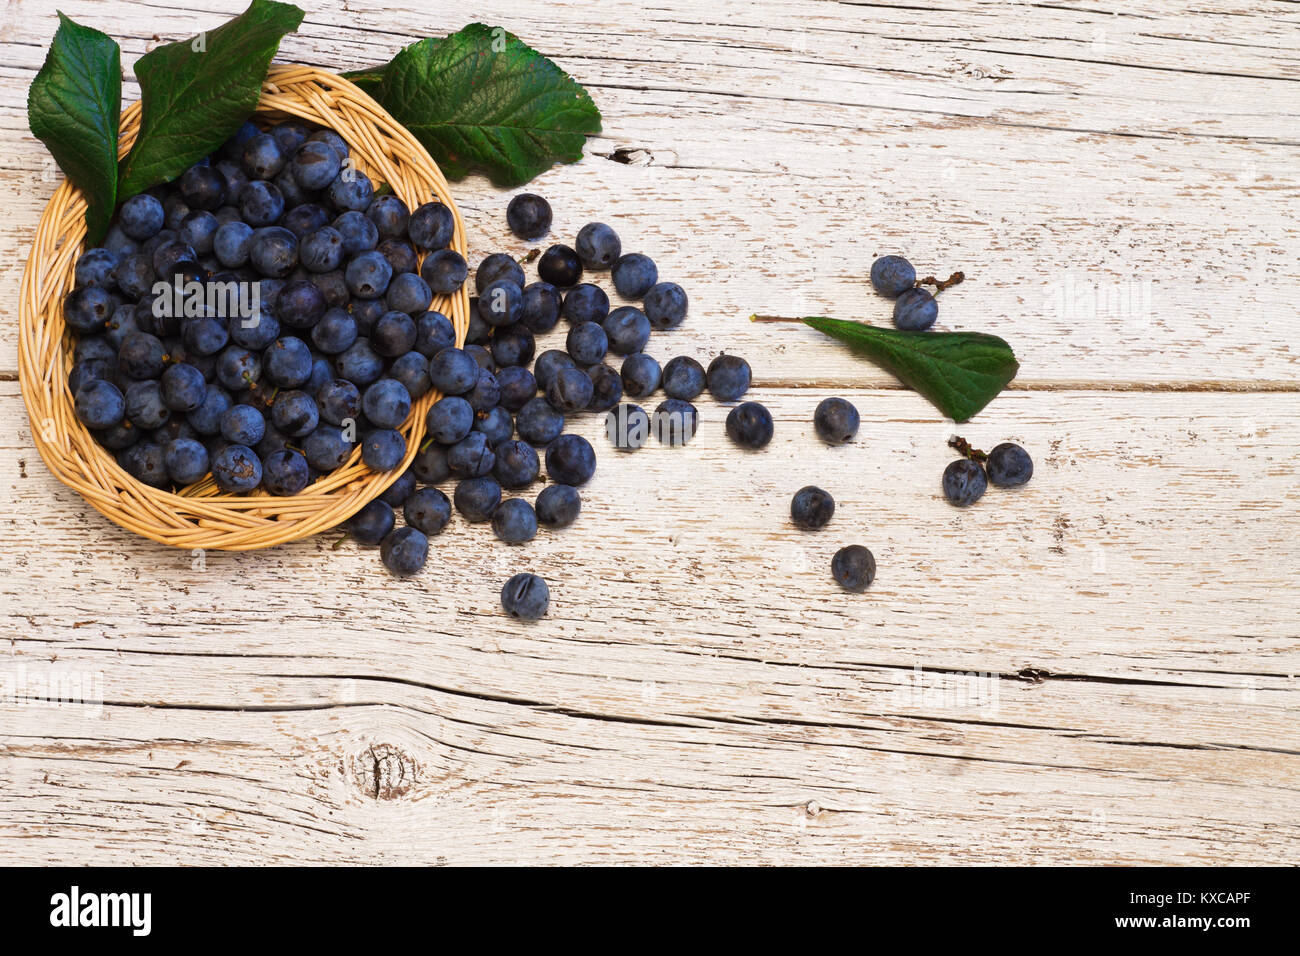 blue berries blackthorn and leaves in a wicker basket on a white wooden background Stock Photo